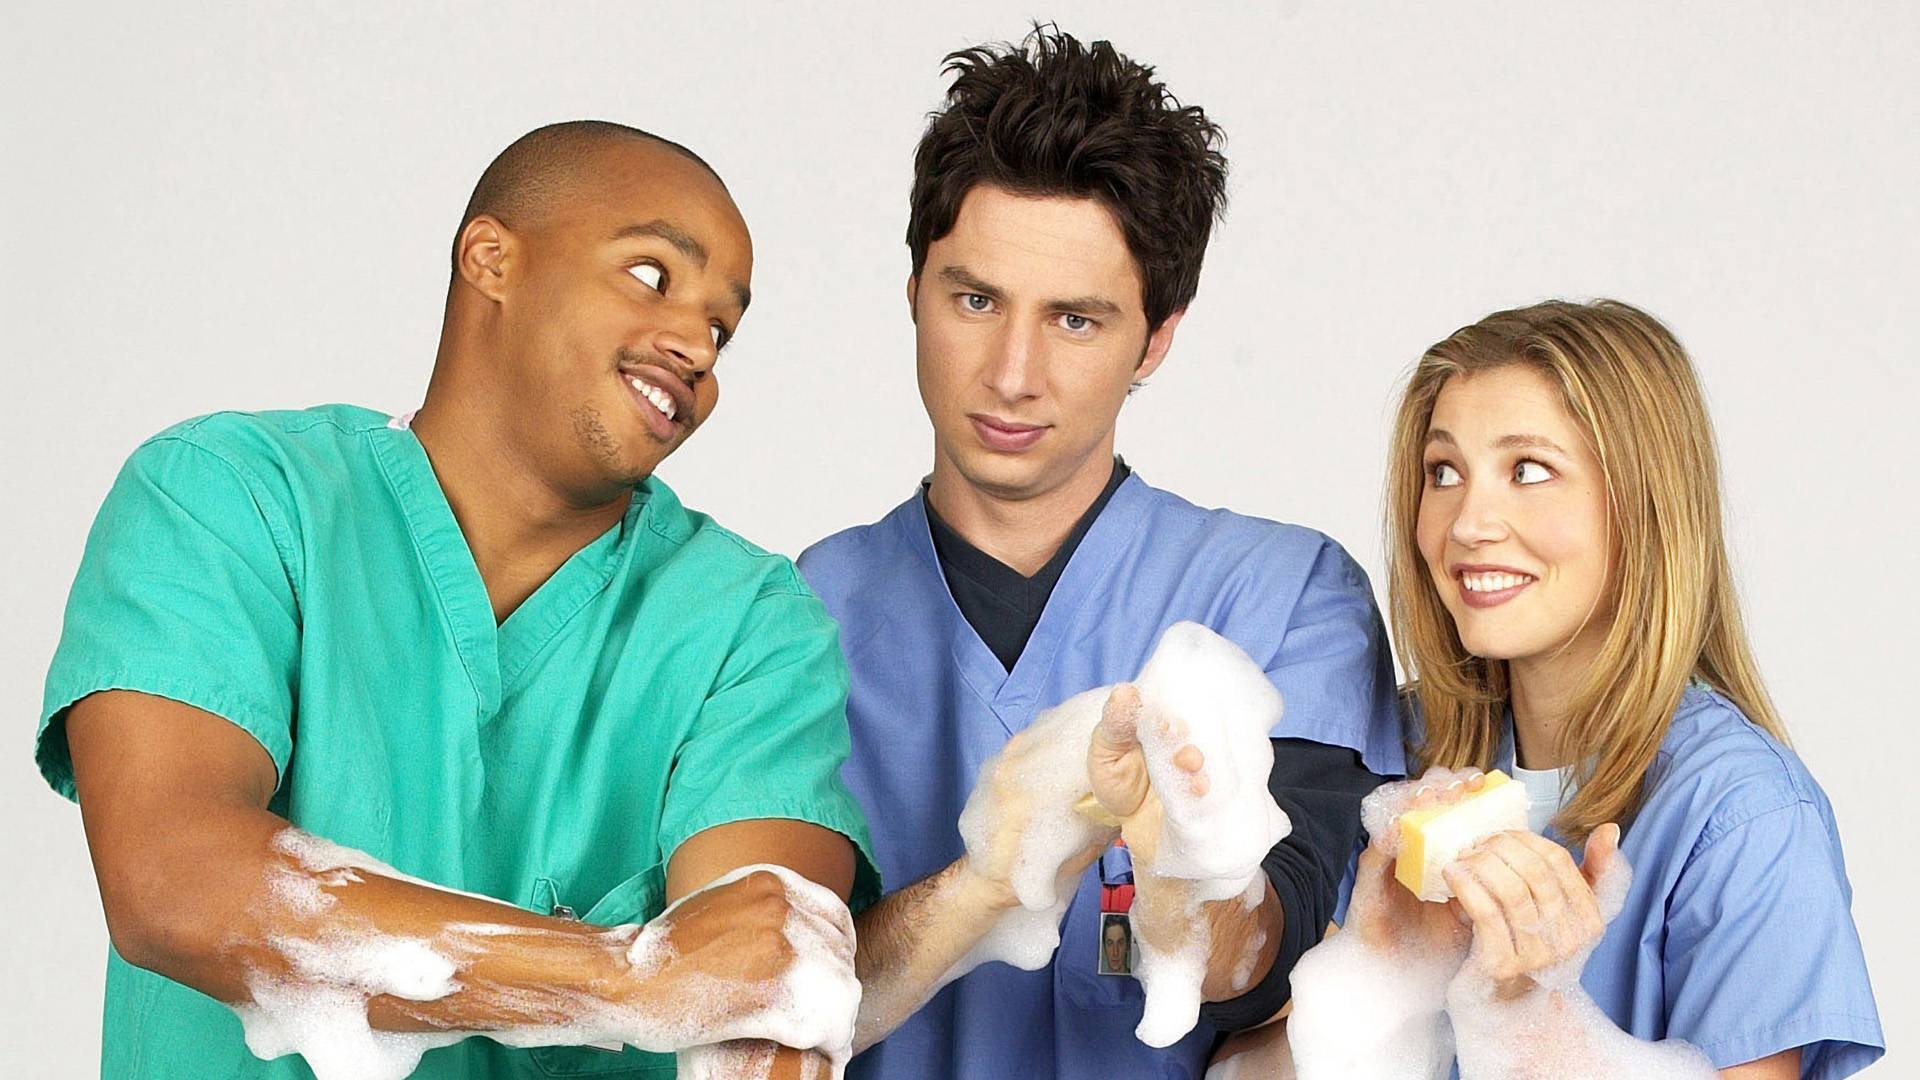 Scrubs (TV Series): An American medical sitcom television show created by Bill Lawrence that premiered on October 2, 2001. 1920x1080 Full HD Background.